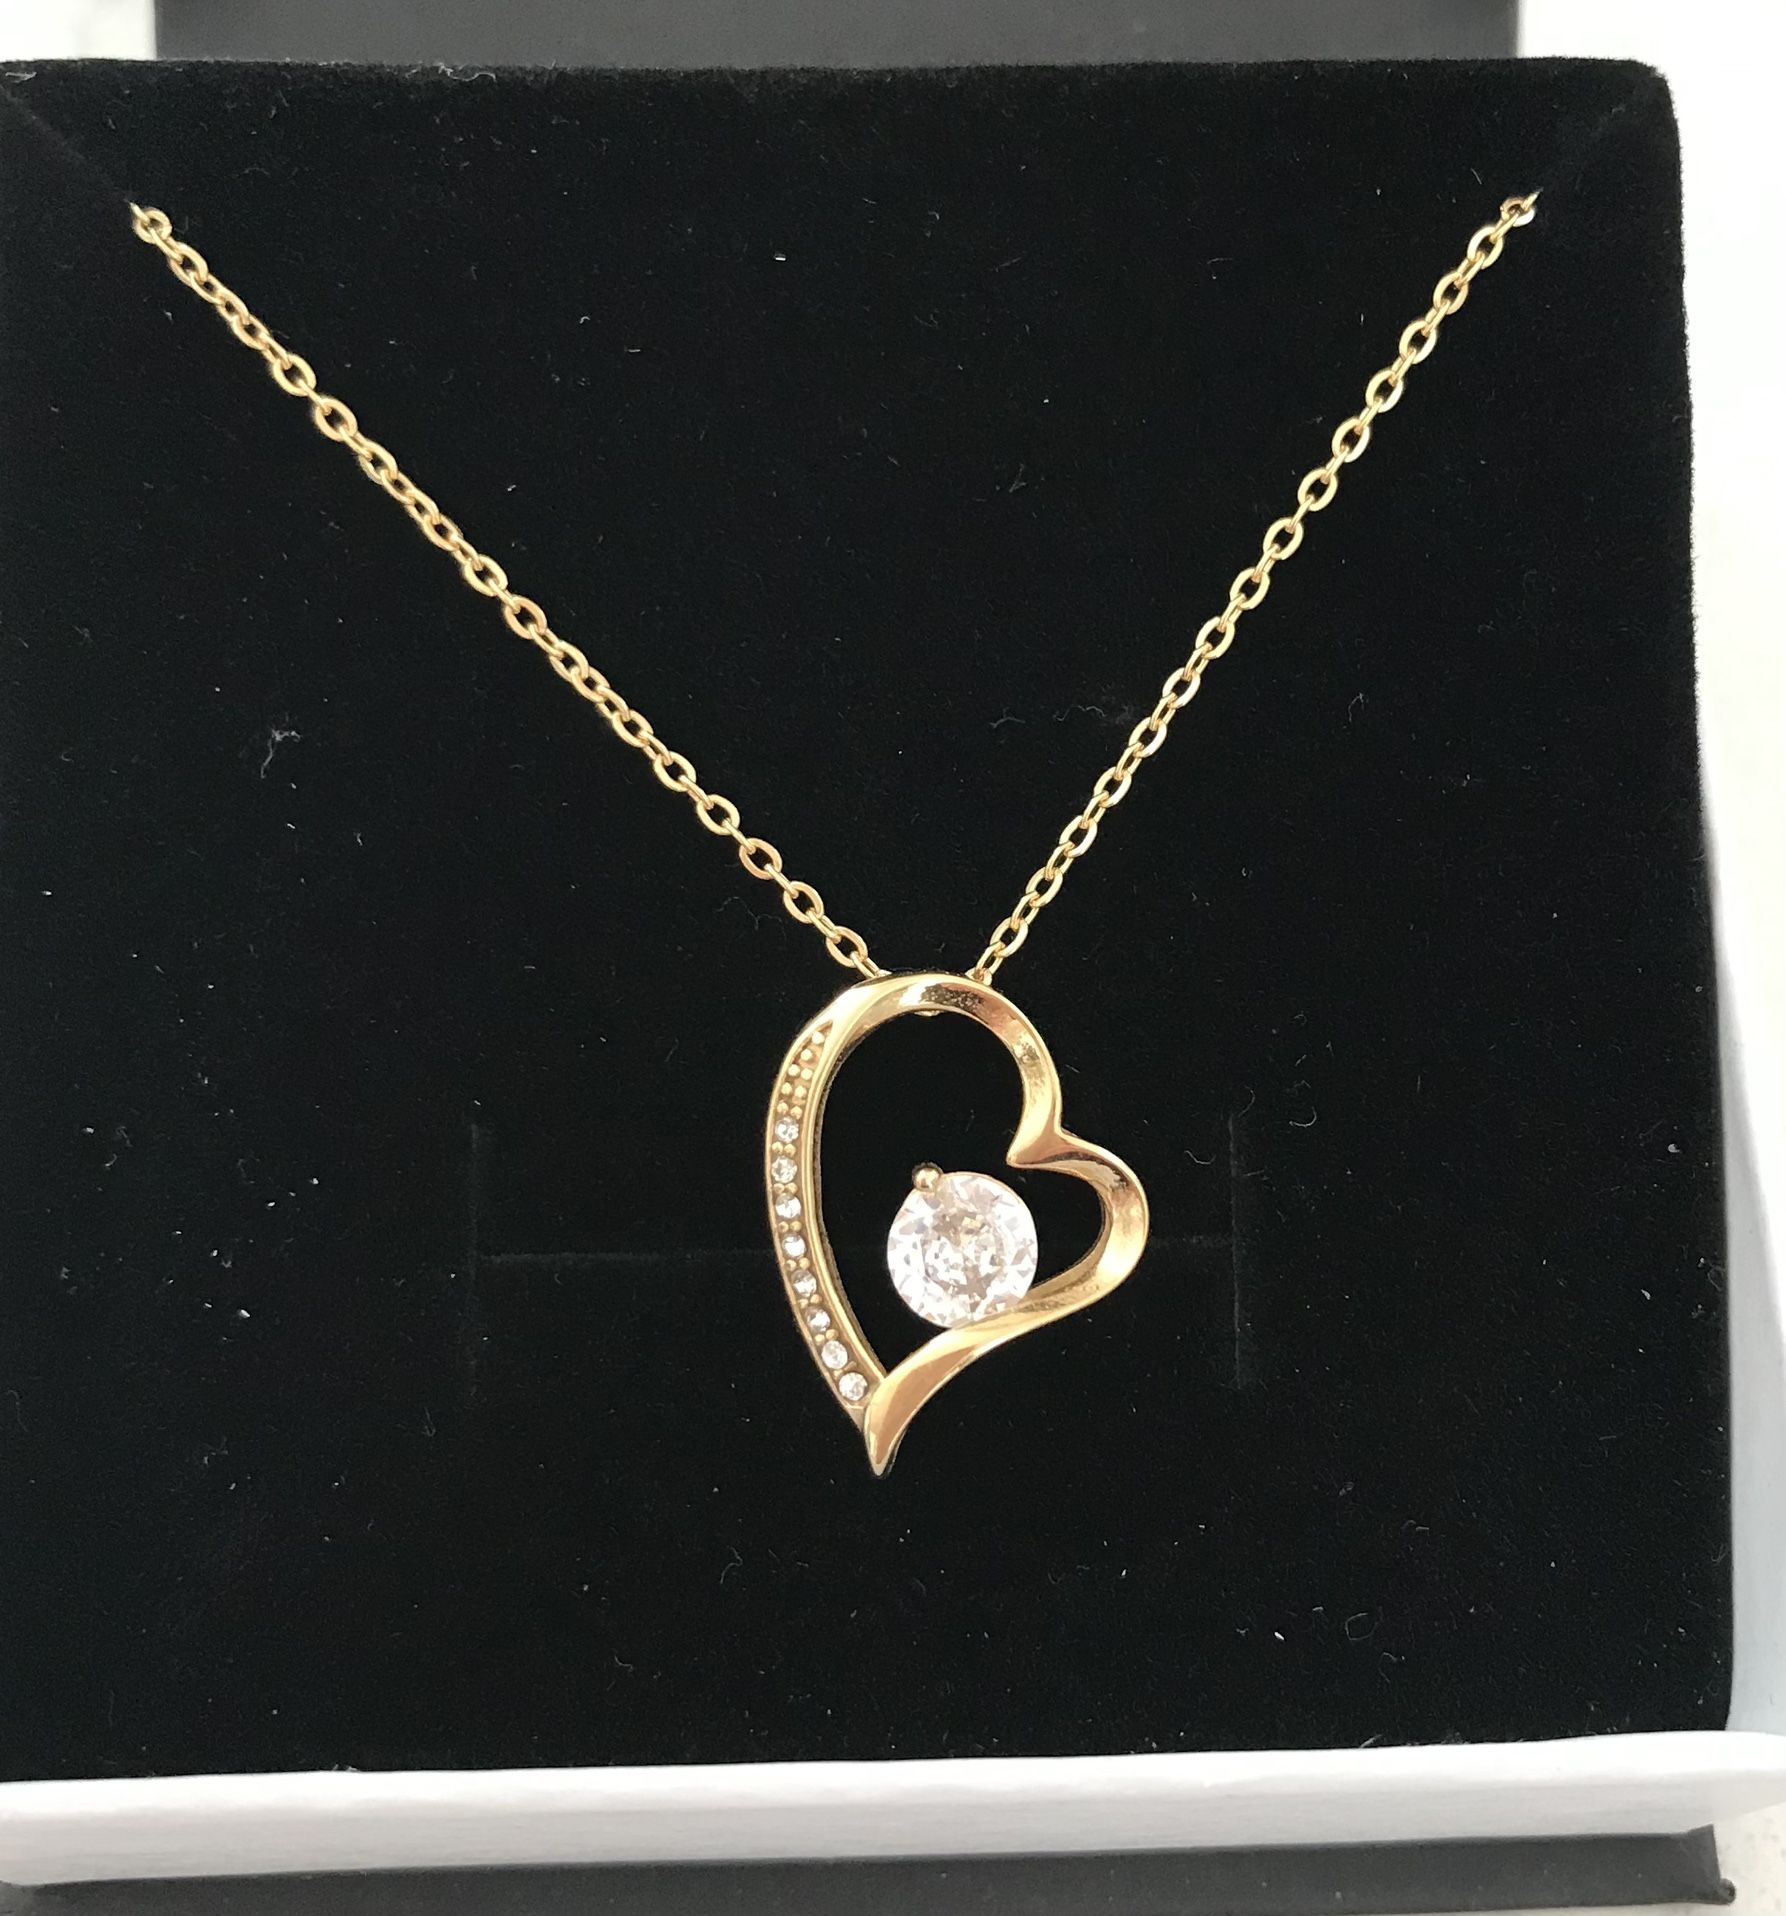 New in box  Gold Heart Necklace with Cubic Zirconia 6.5 center stone